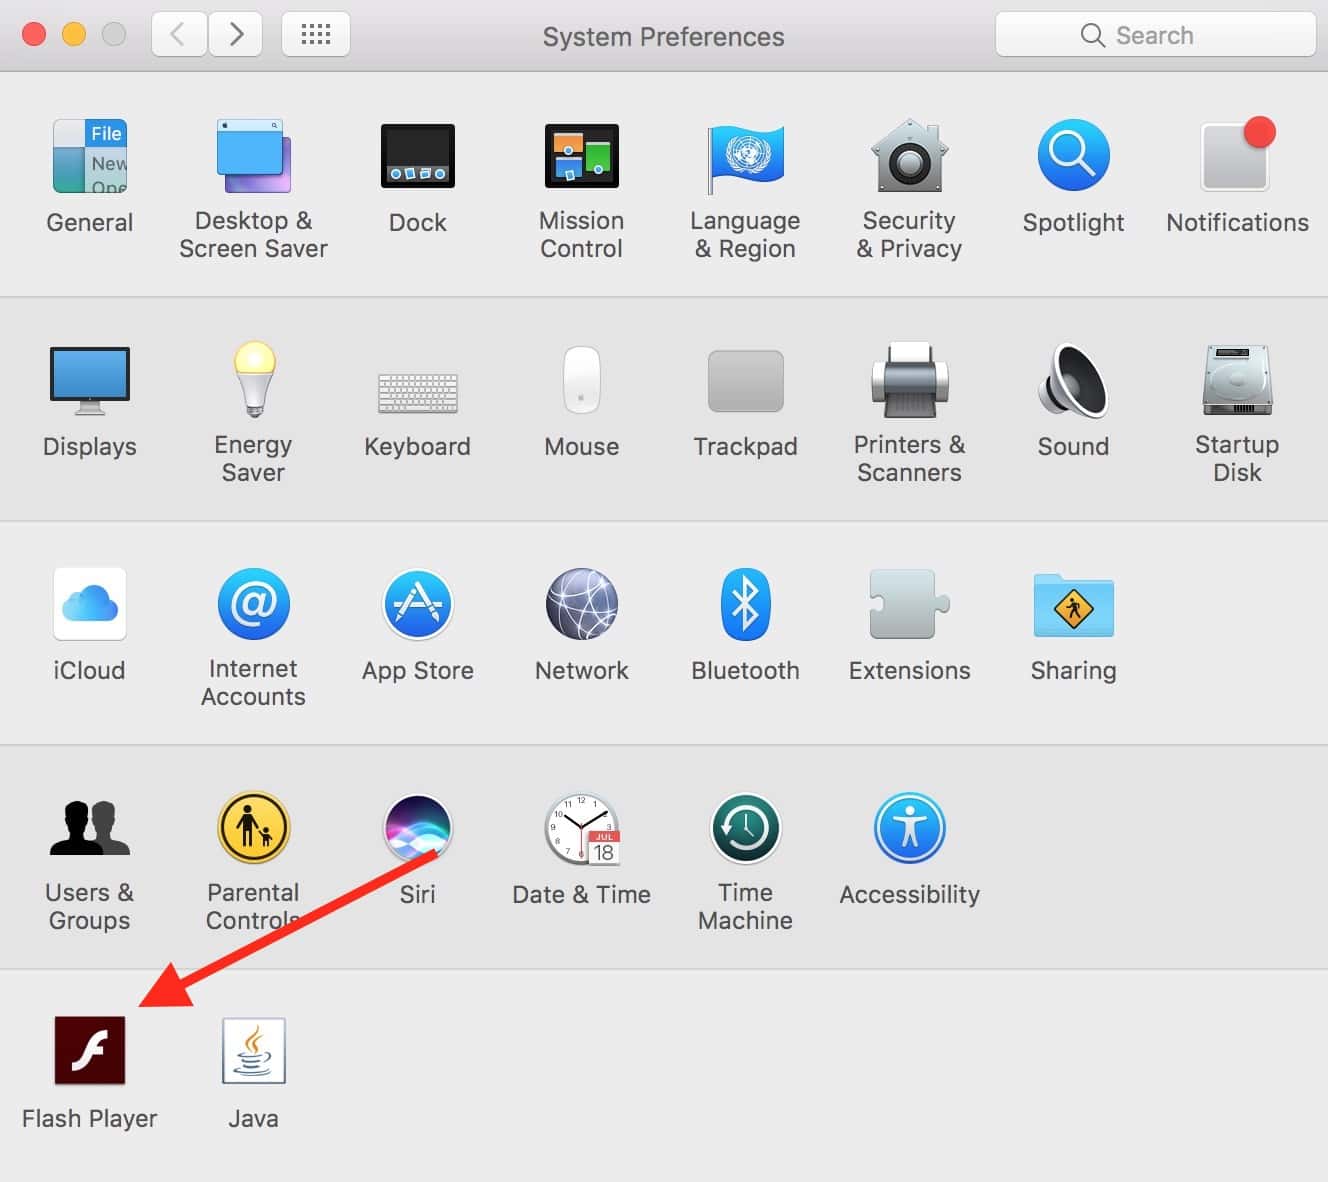 The Flash Player icon in System Preferences has the Flash updater and settings